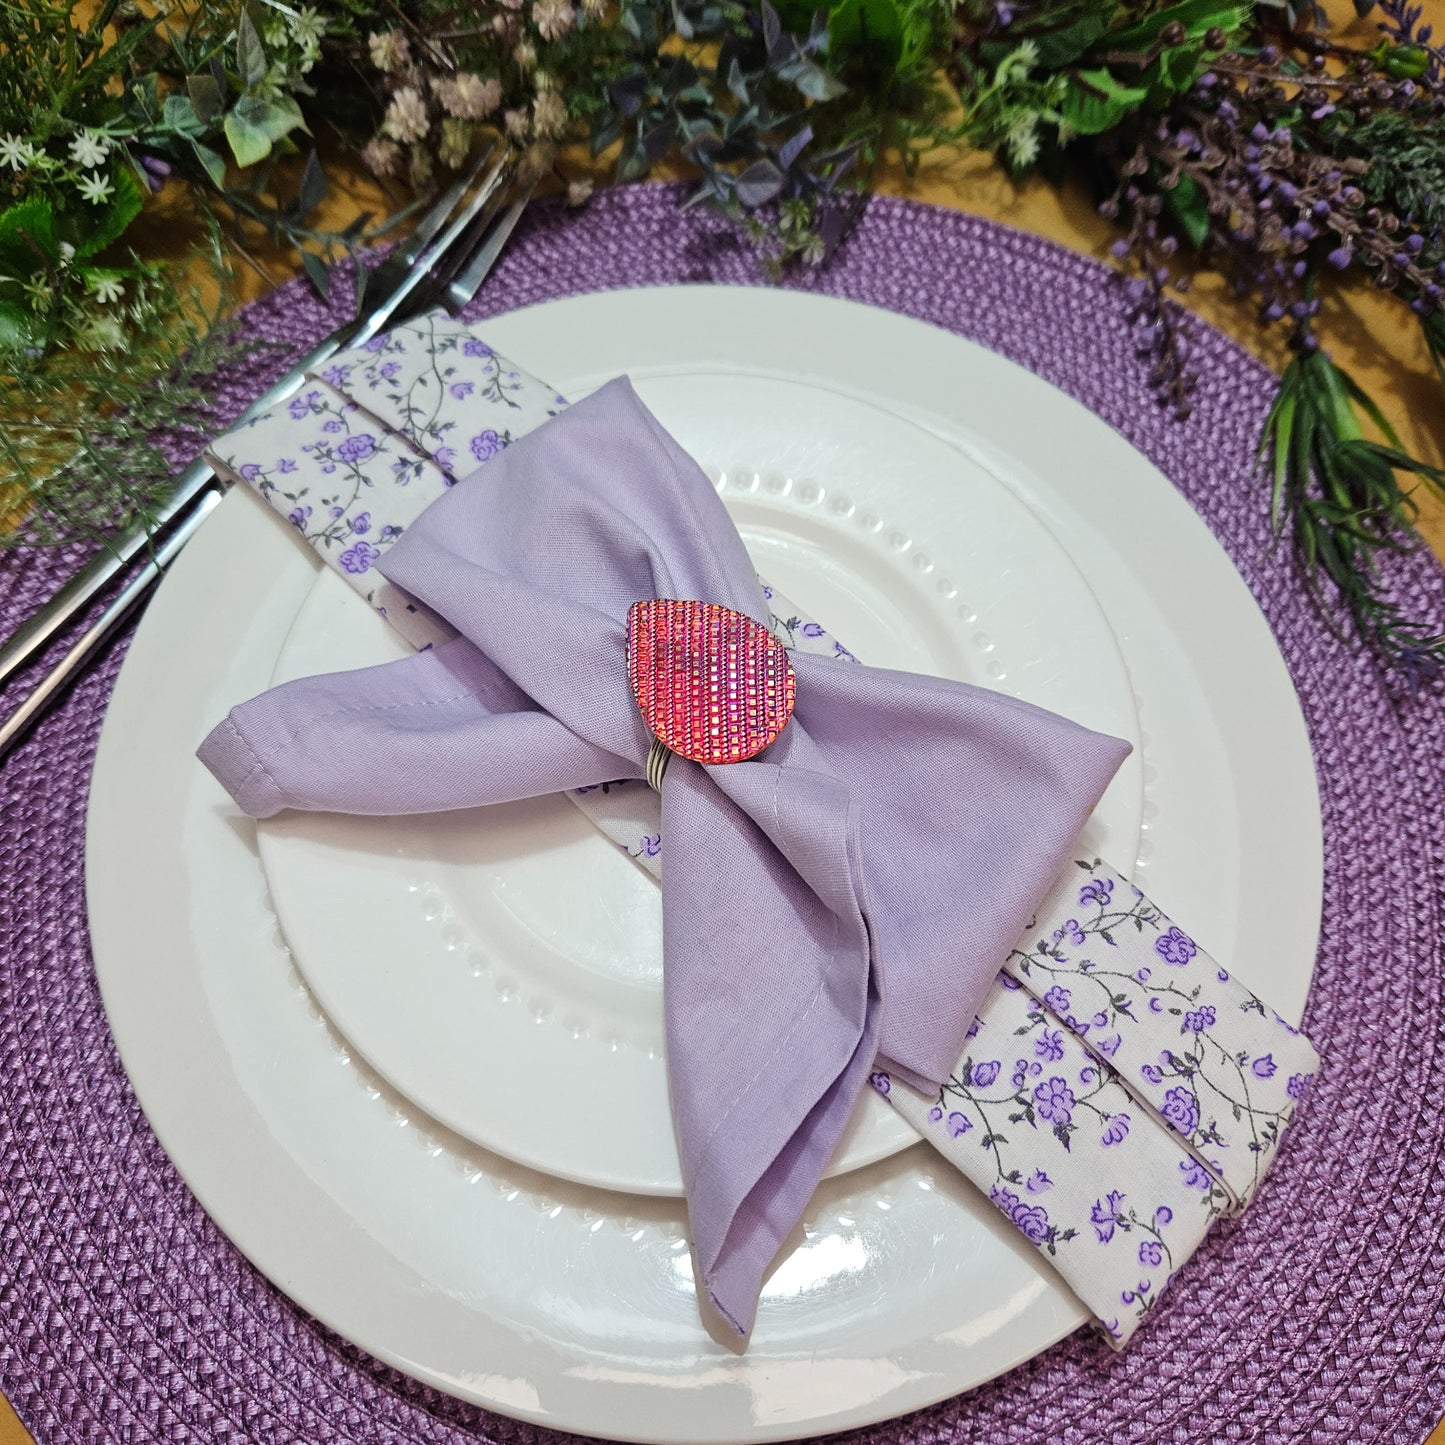 Set of 4 Tabletop Collection Indoor/Outdoor Purple Round Placemat 15" Dia